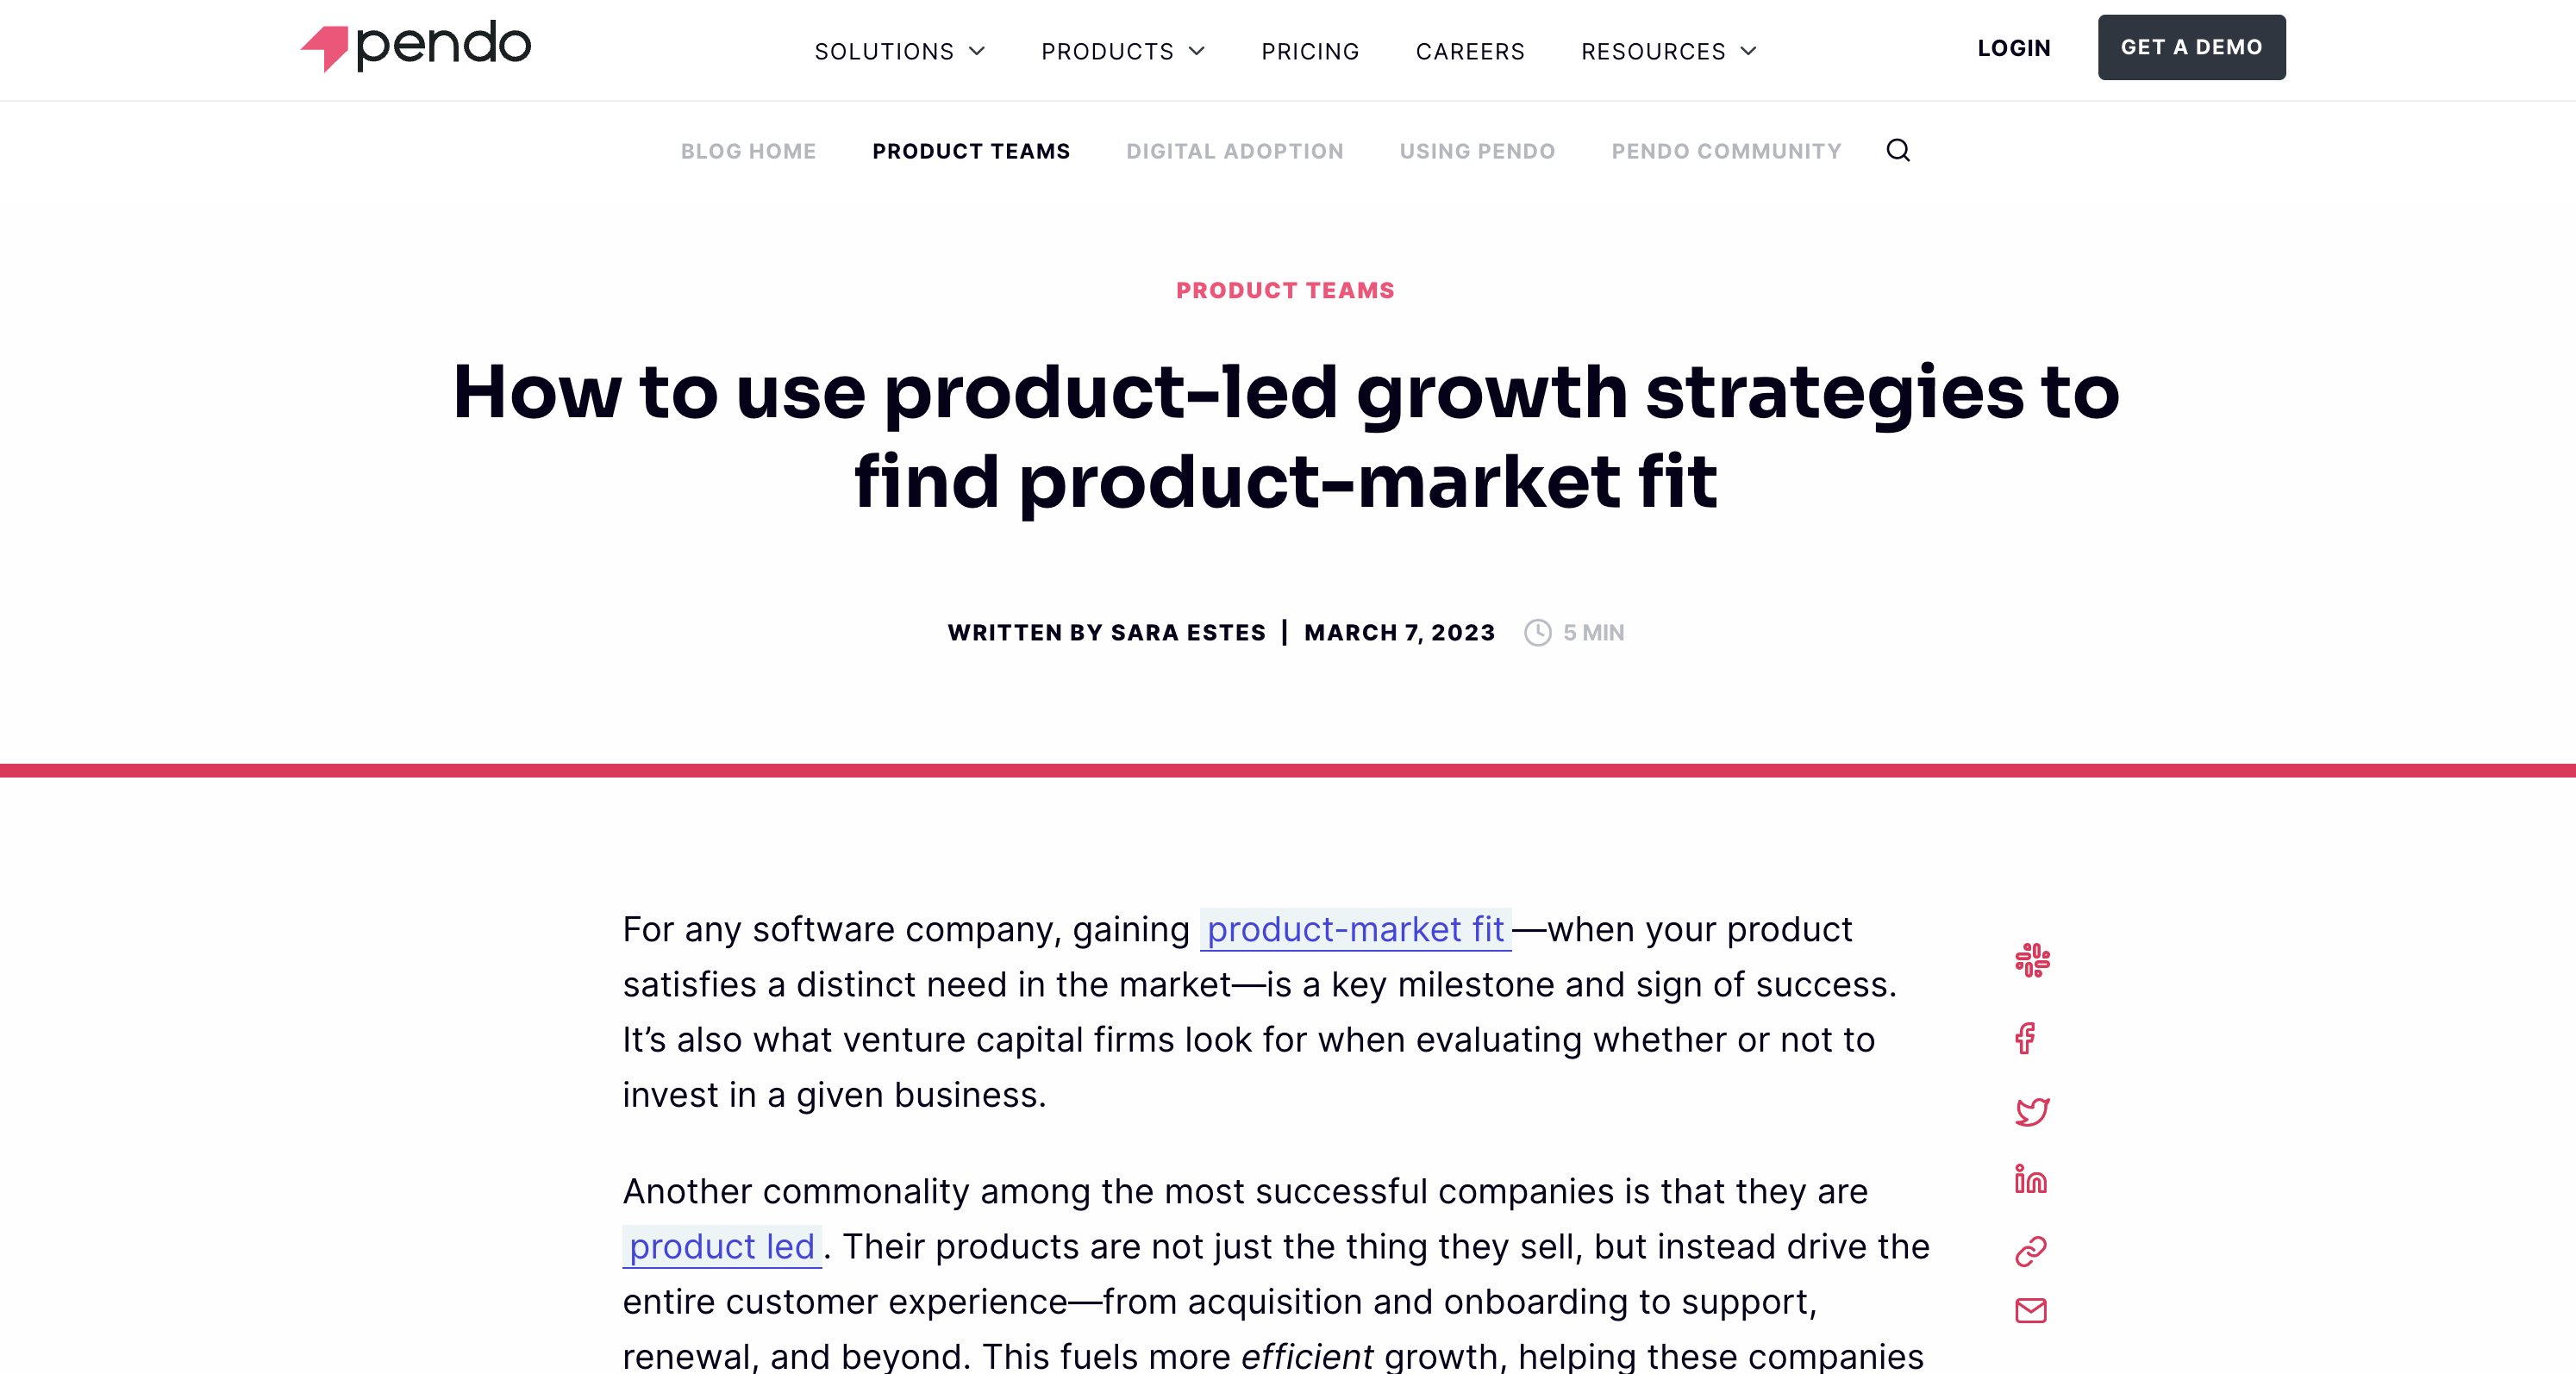 How to use product-led growth strategies to find product-market fit